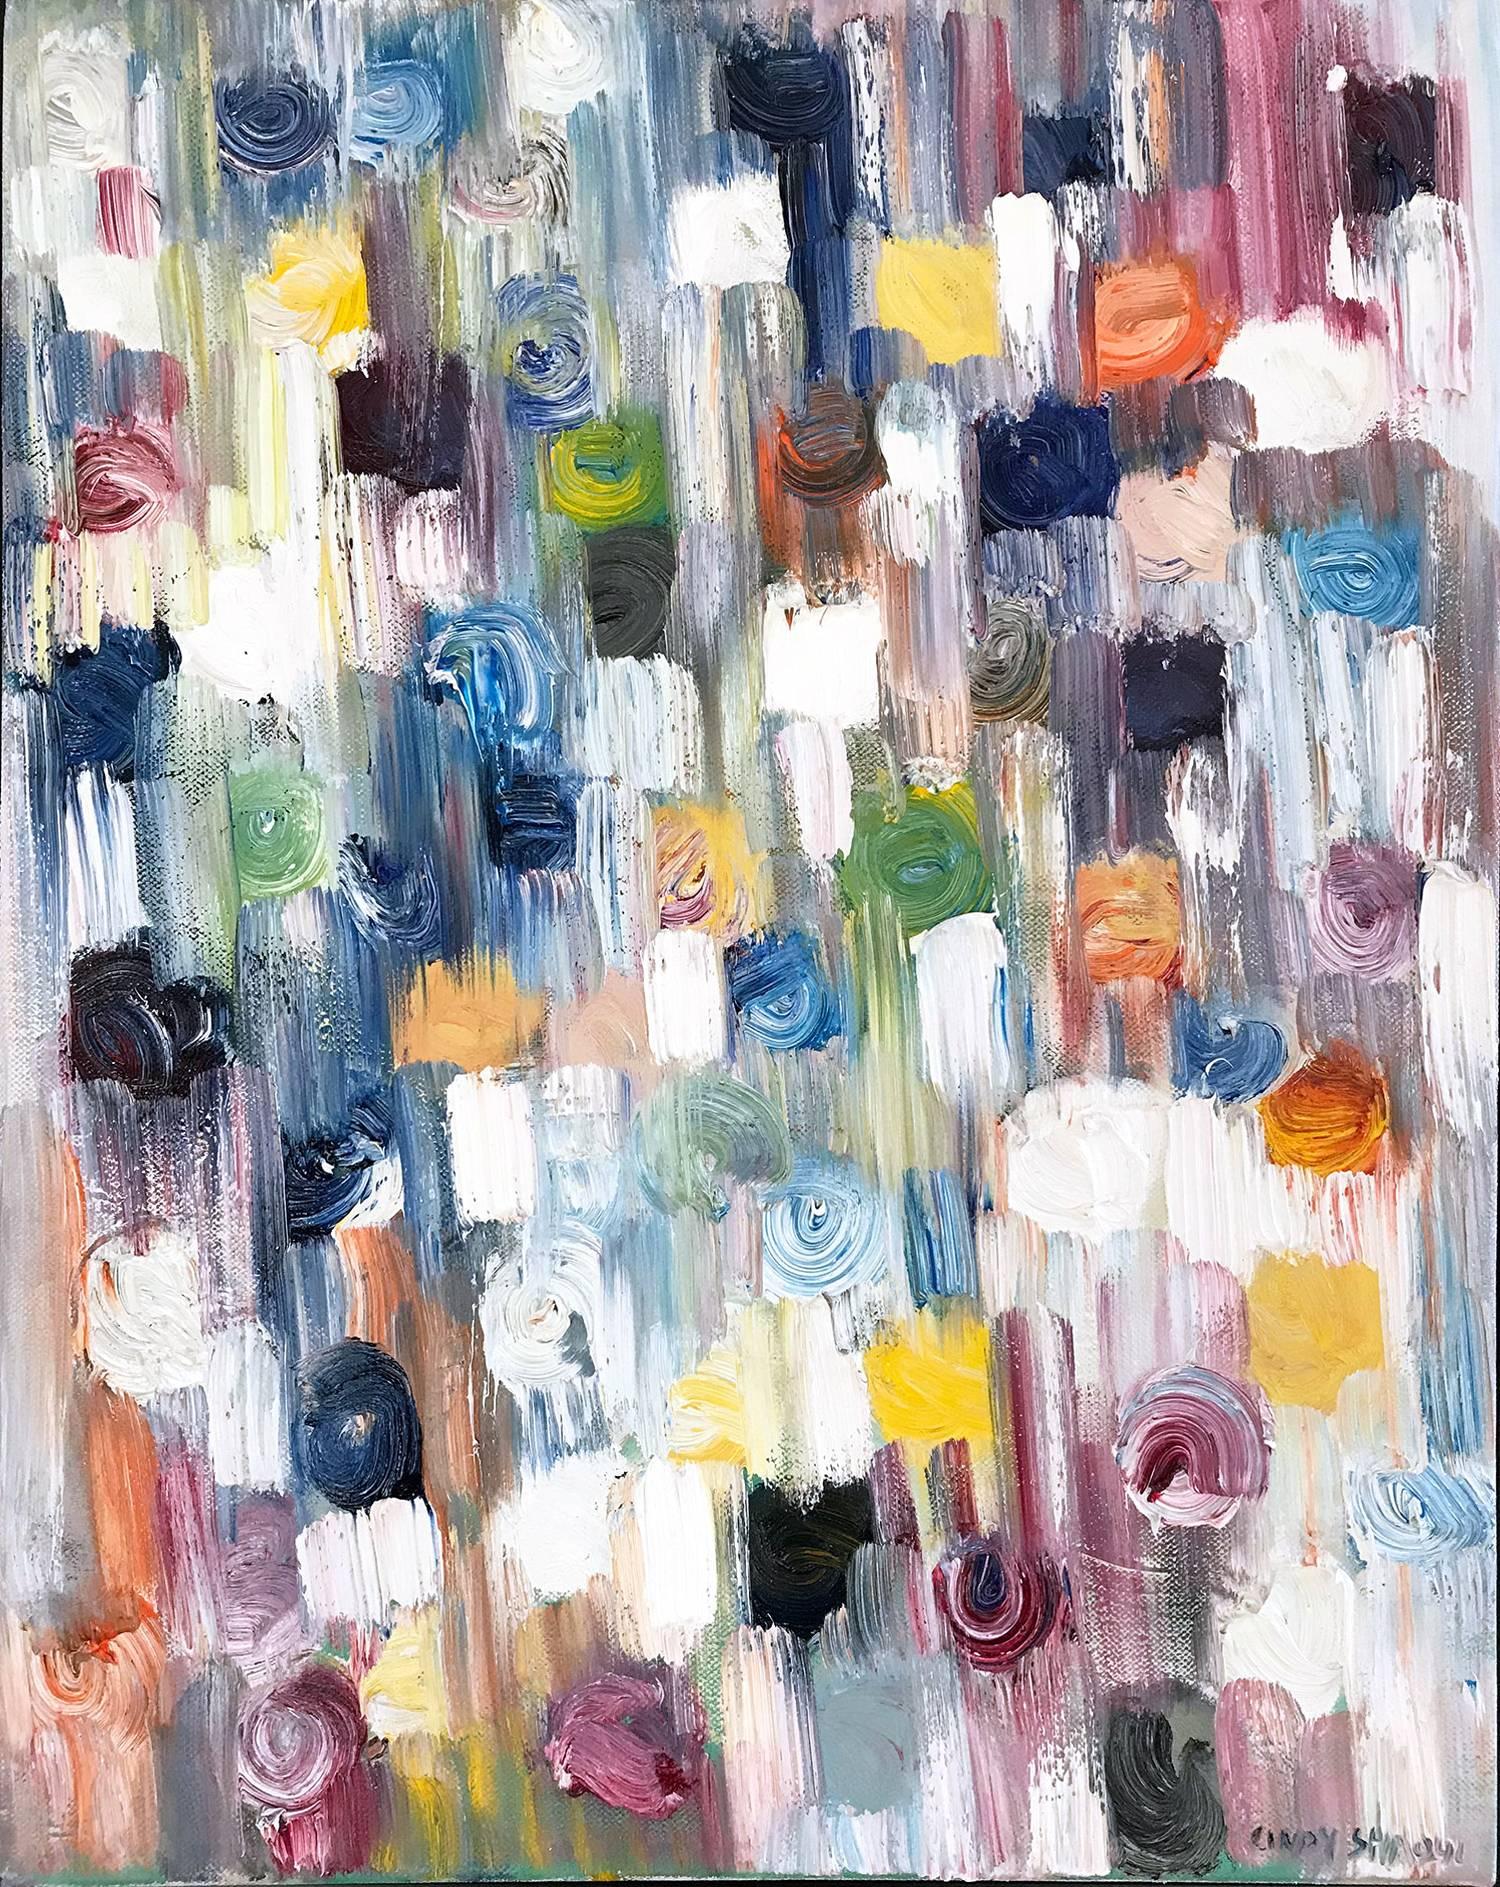 Dripping Dots, Parisian Nights - Painting by Cindy Shaoul